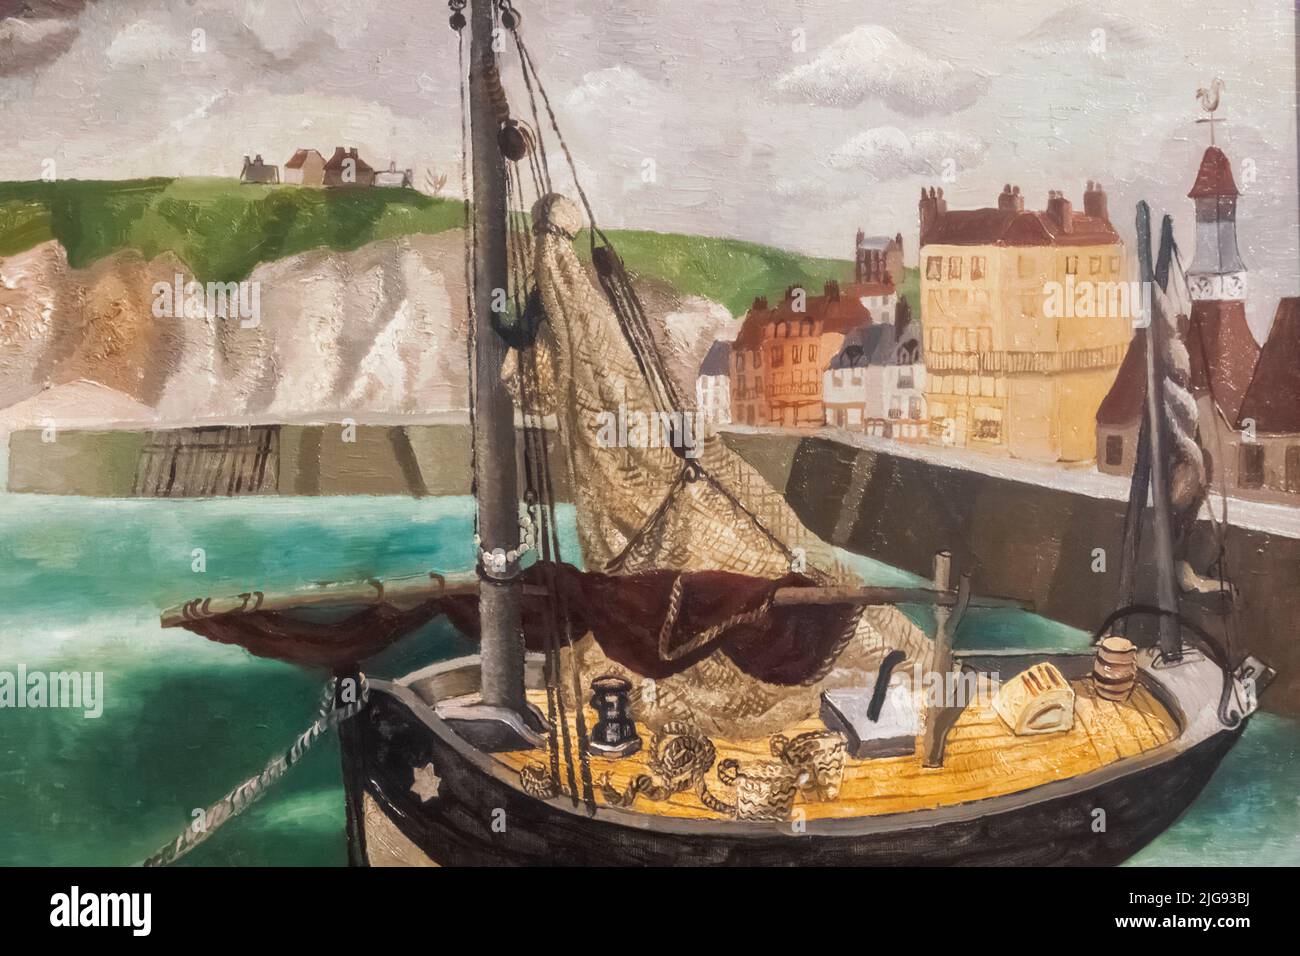 Painting titled 'A Fishing Boat in Dieppe Harbour' by Christopher Wood dated 1929 Stock Photo